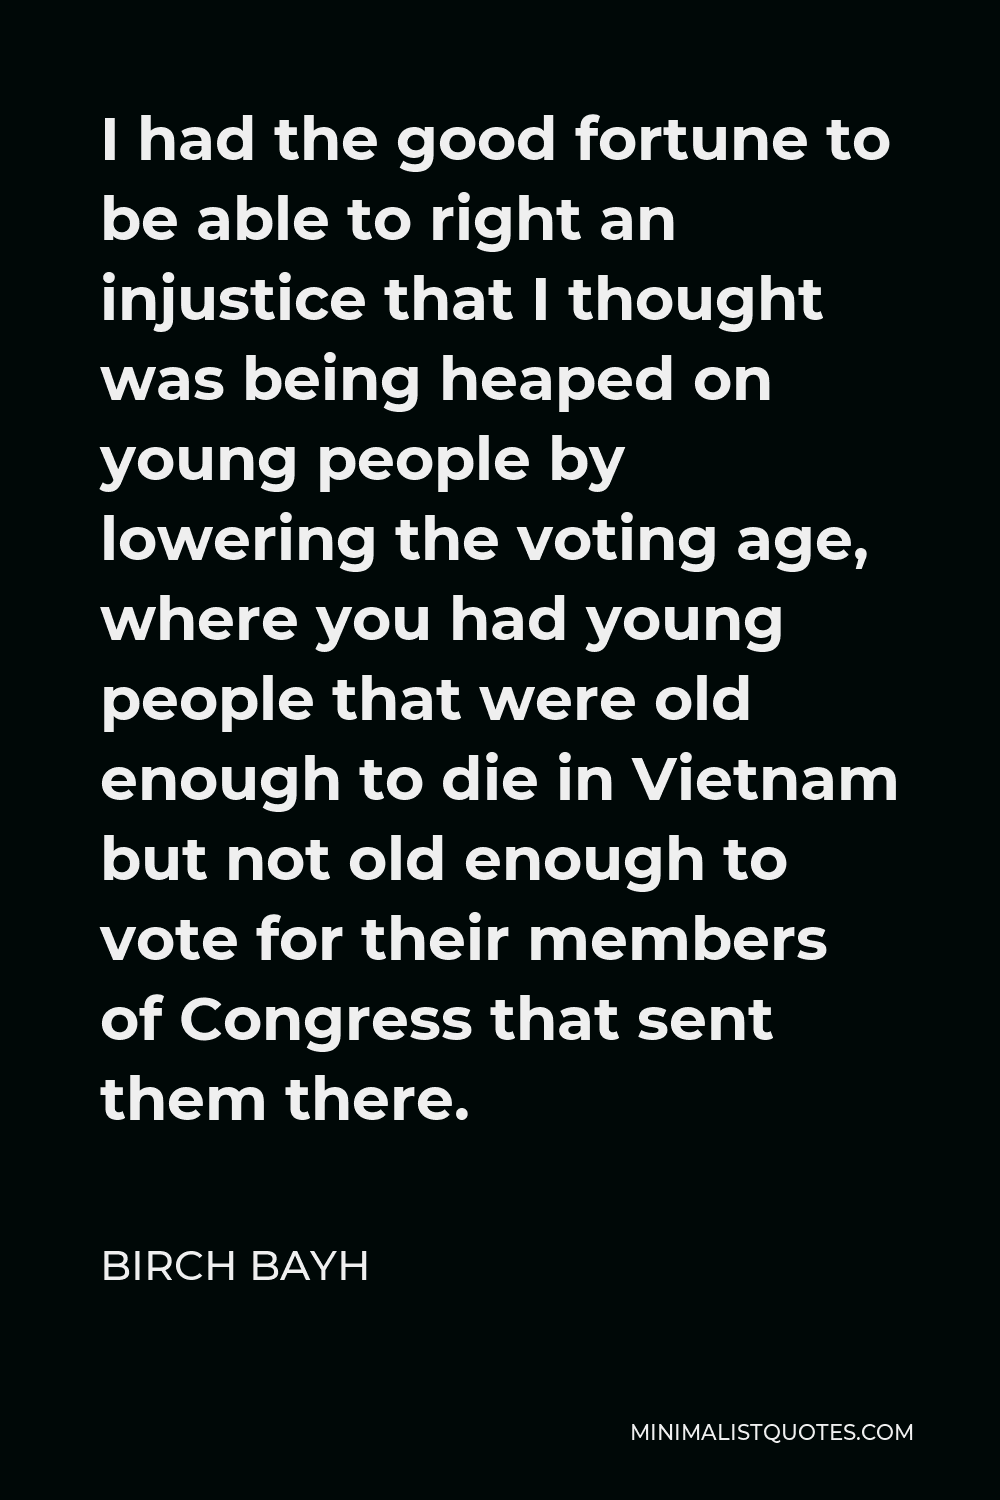 Birch Bayh Quote - I had the good fortune to be able to right an injustice that I thought was being heaped on young people by lowering the voting age, where you had young people that were old enough to die in Vietnam but not old enough to vote for their members of Congress that sent them there.